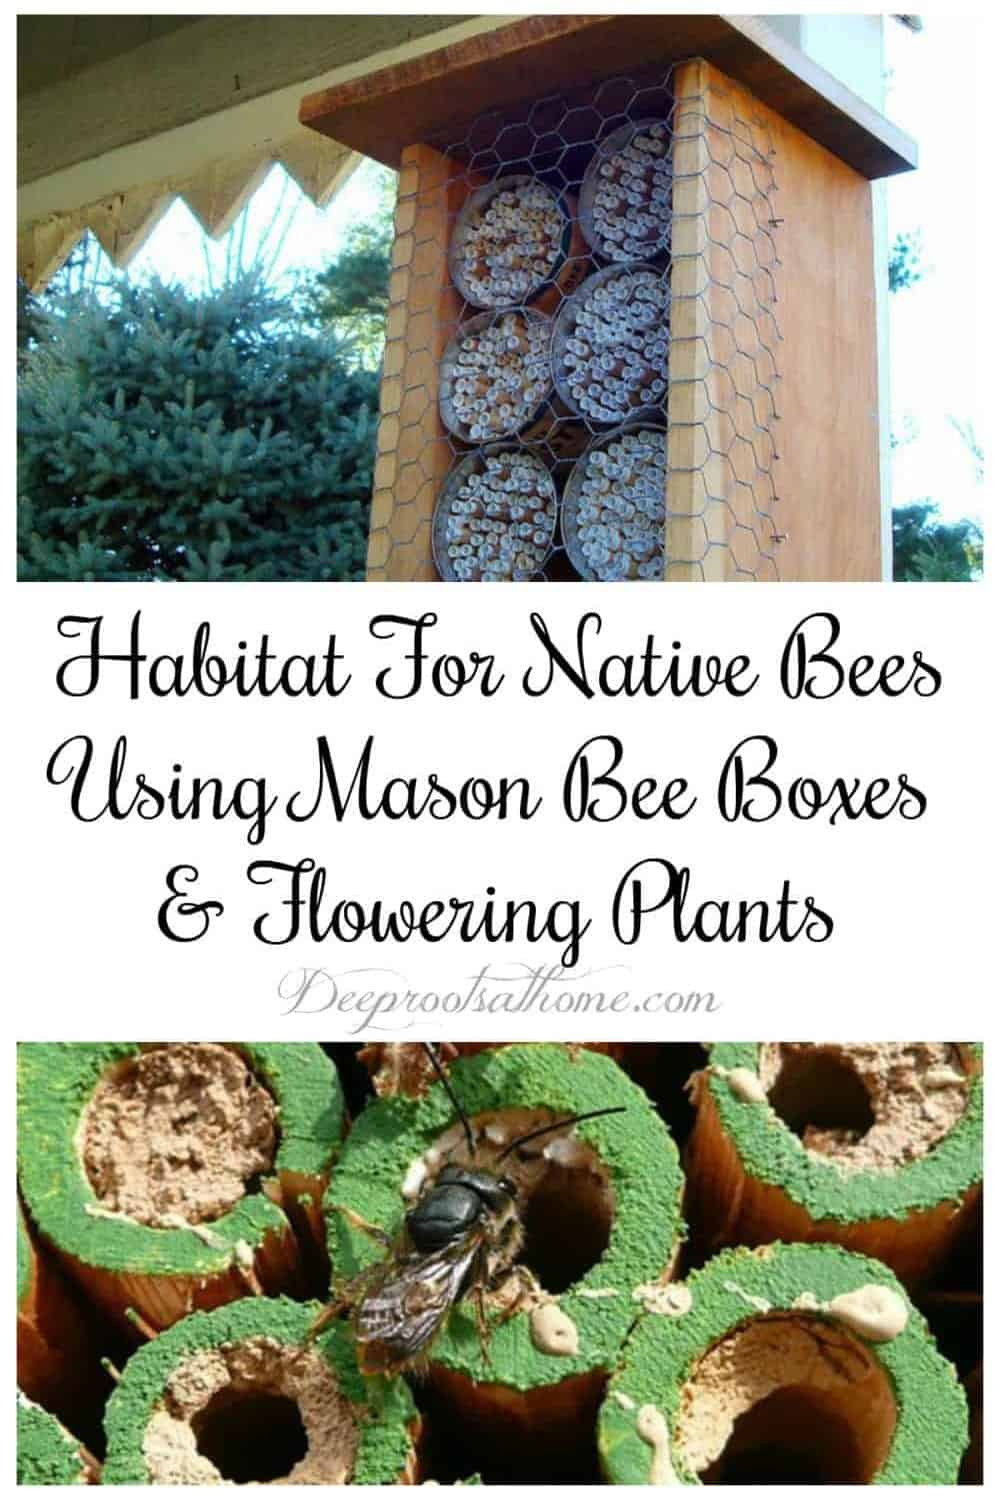 Habitat For Native Bees Using Mason Bee Boxes & Flowering Plants. 2 kinds of mason bee boxes